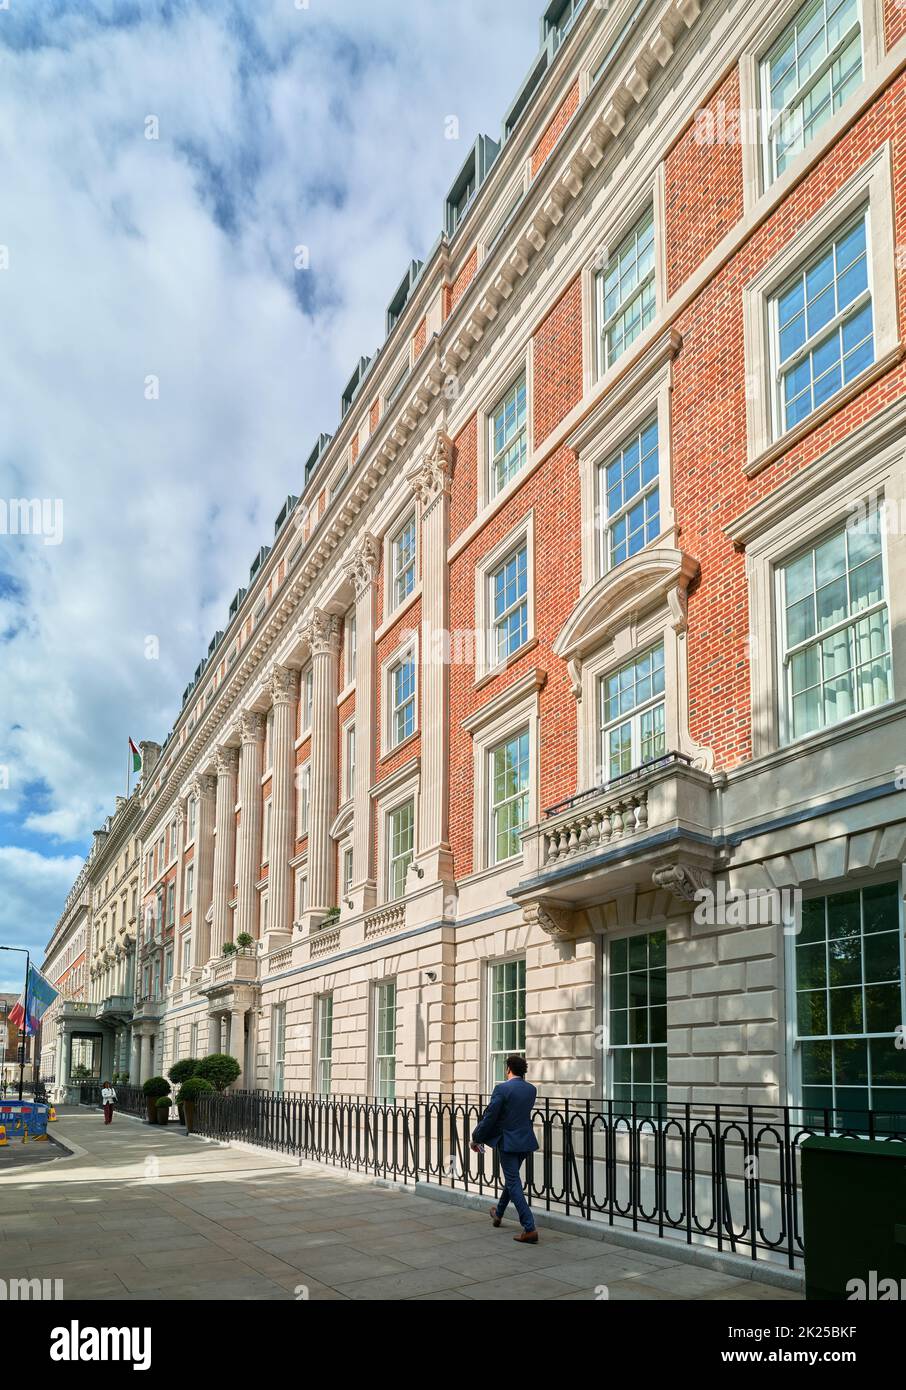 The italian and canadian embassies, Grosvenor Square, Mayfair, London, England. Stock Photo